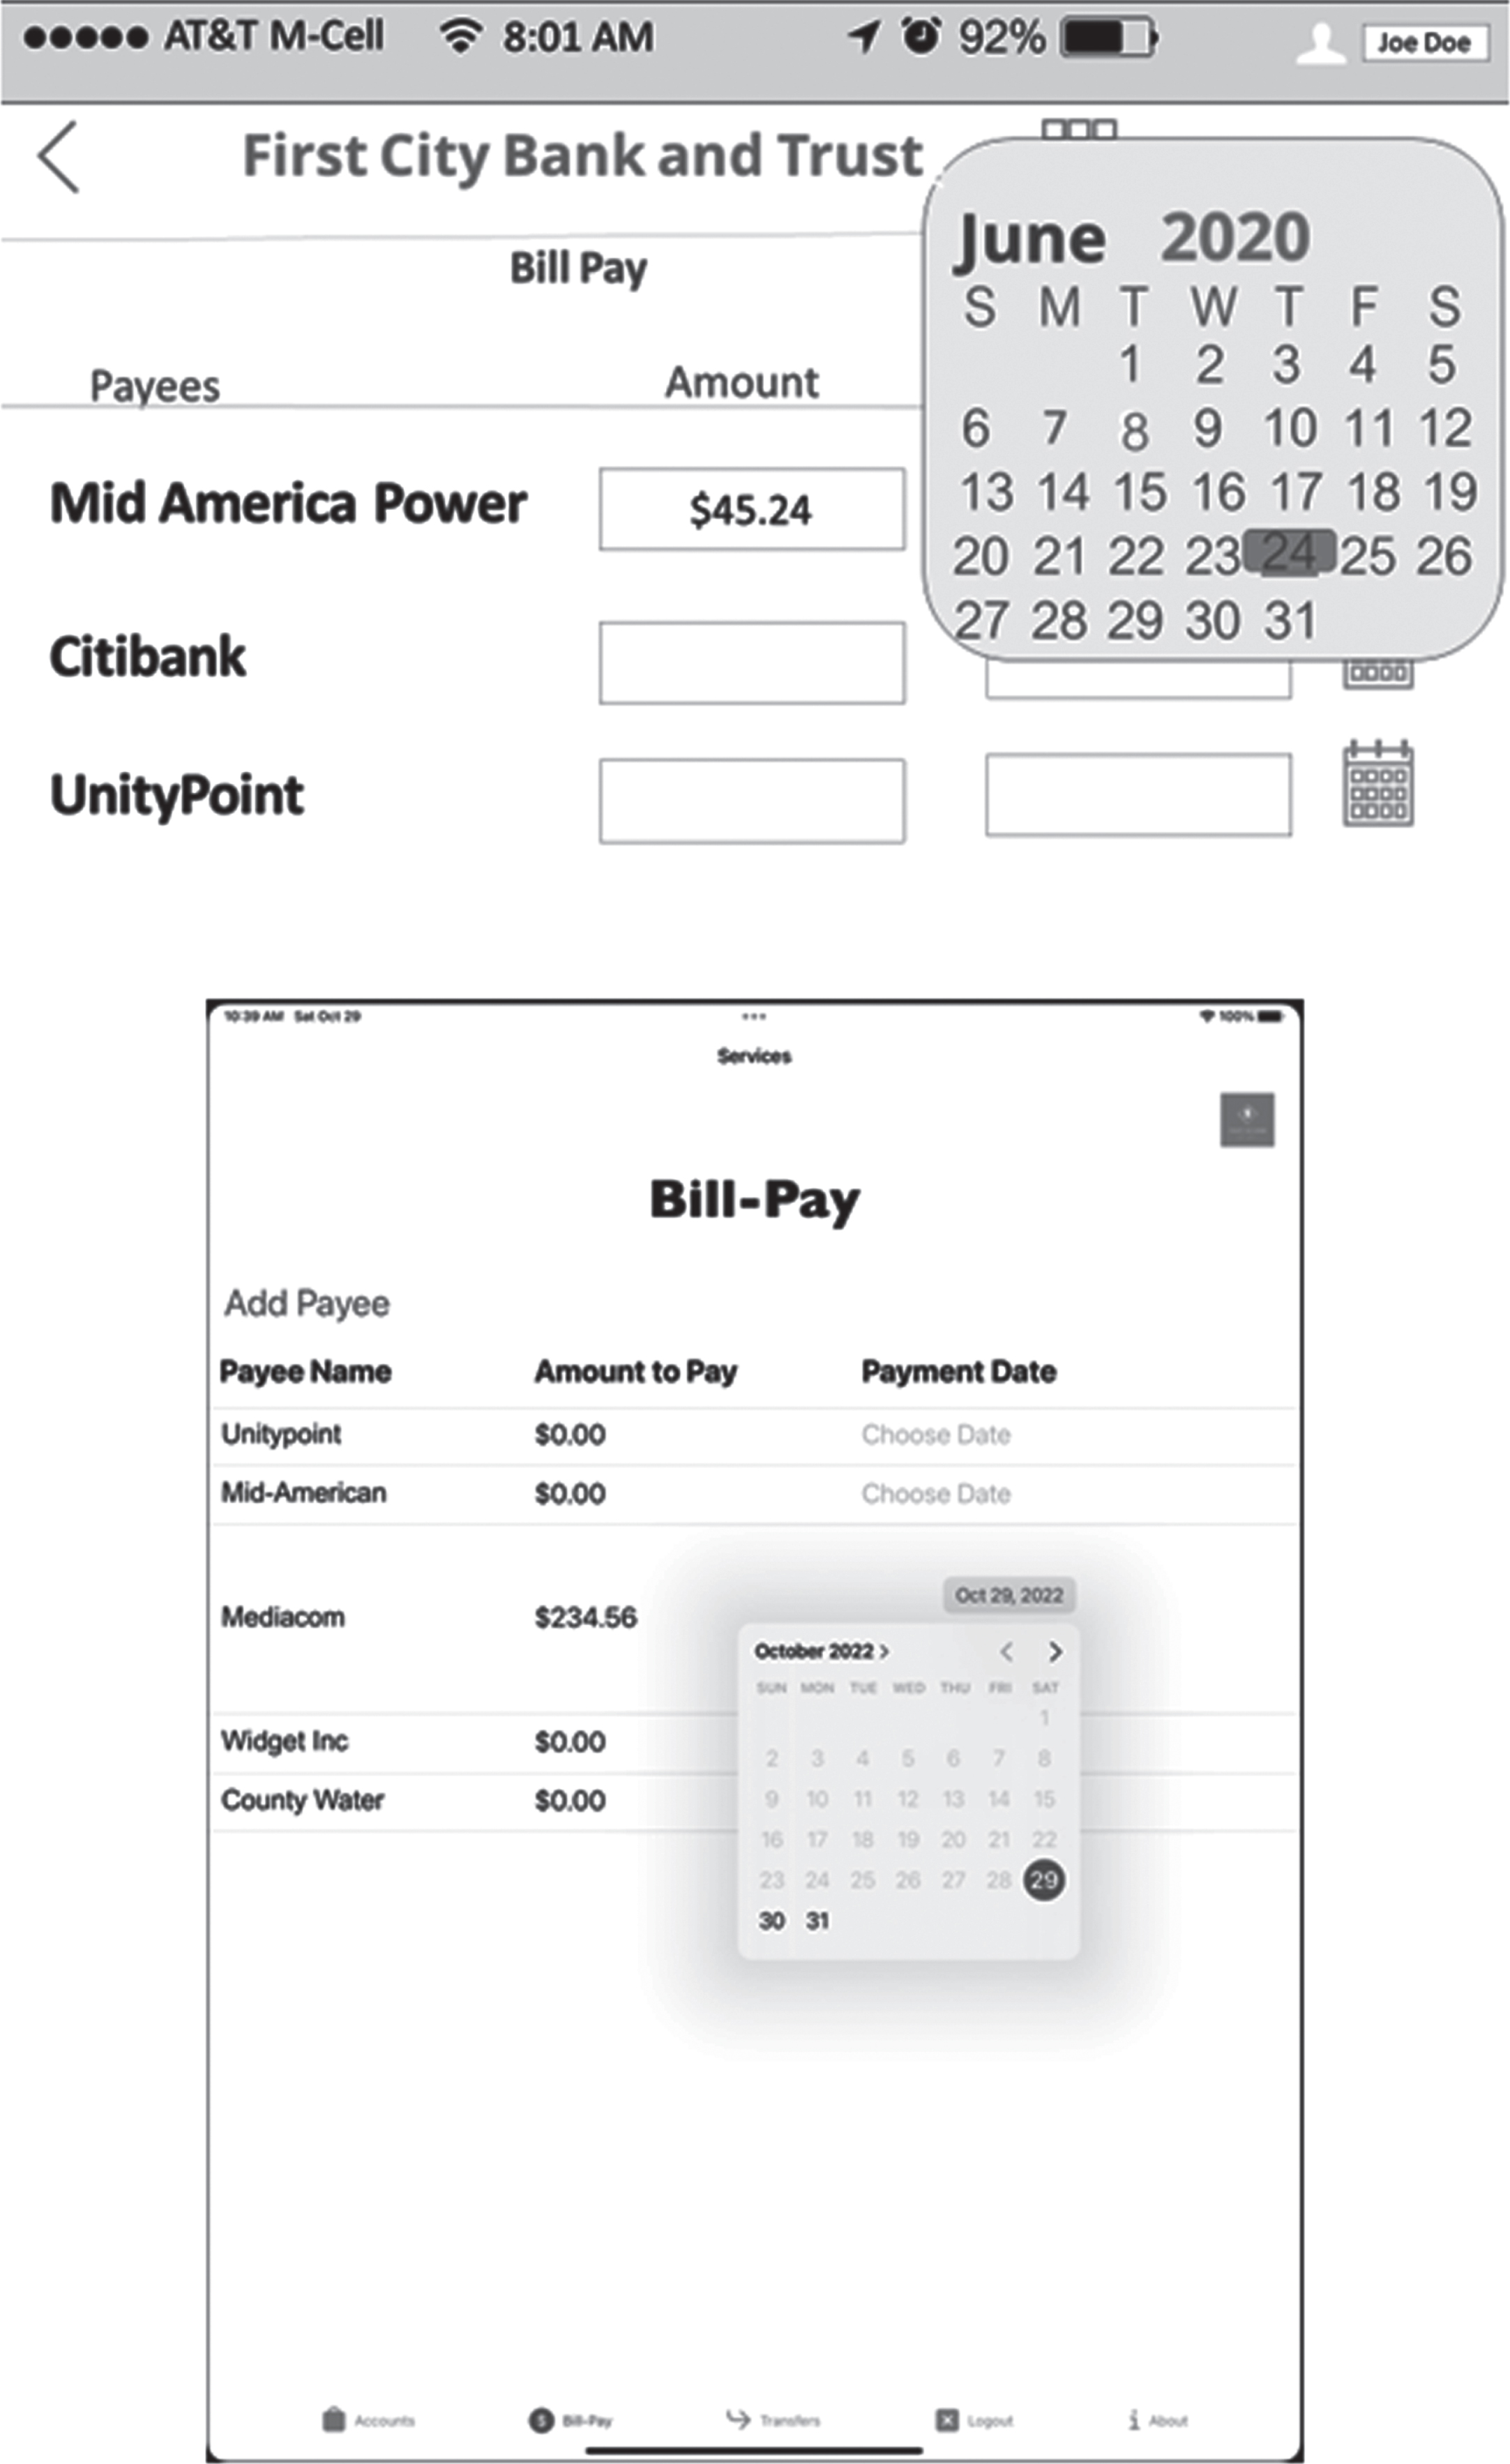 On top, the PowerPoint Wireframe of the Pay Bill Screen with a Calendar. On bottom, the actual view of the Pay Bill Functionality with a Calendar in the final version of the app.